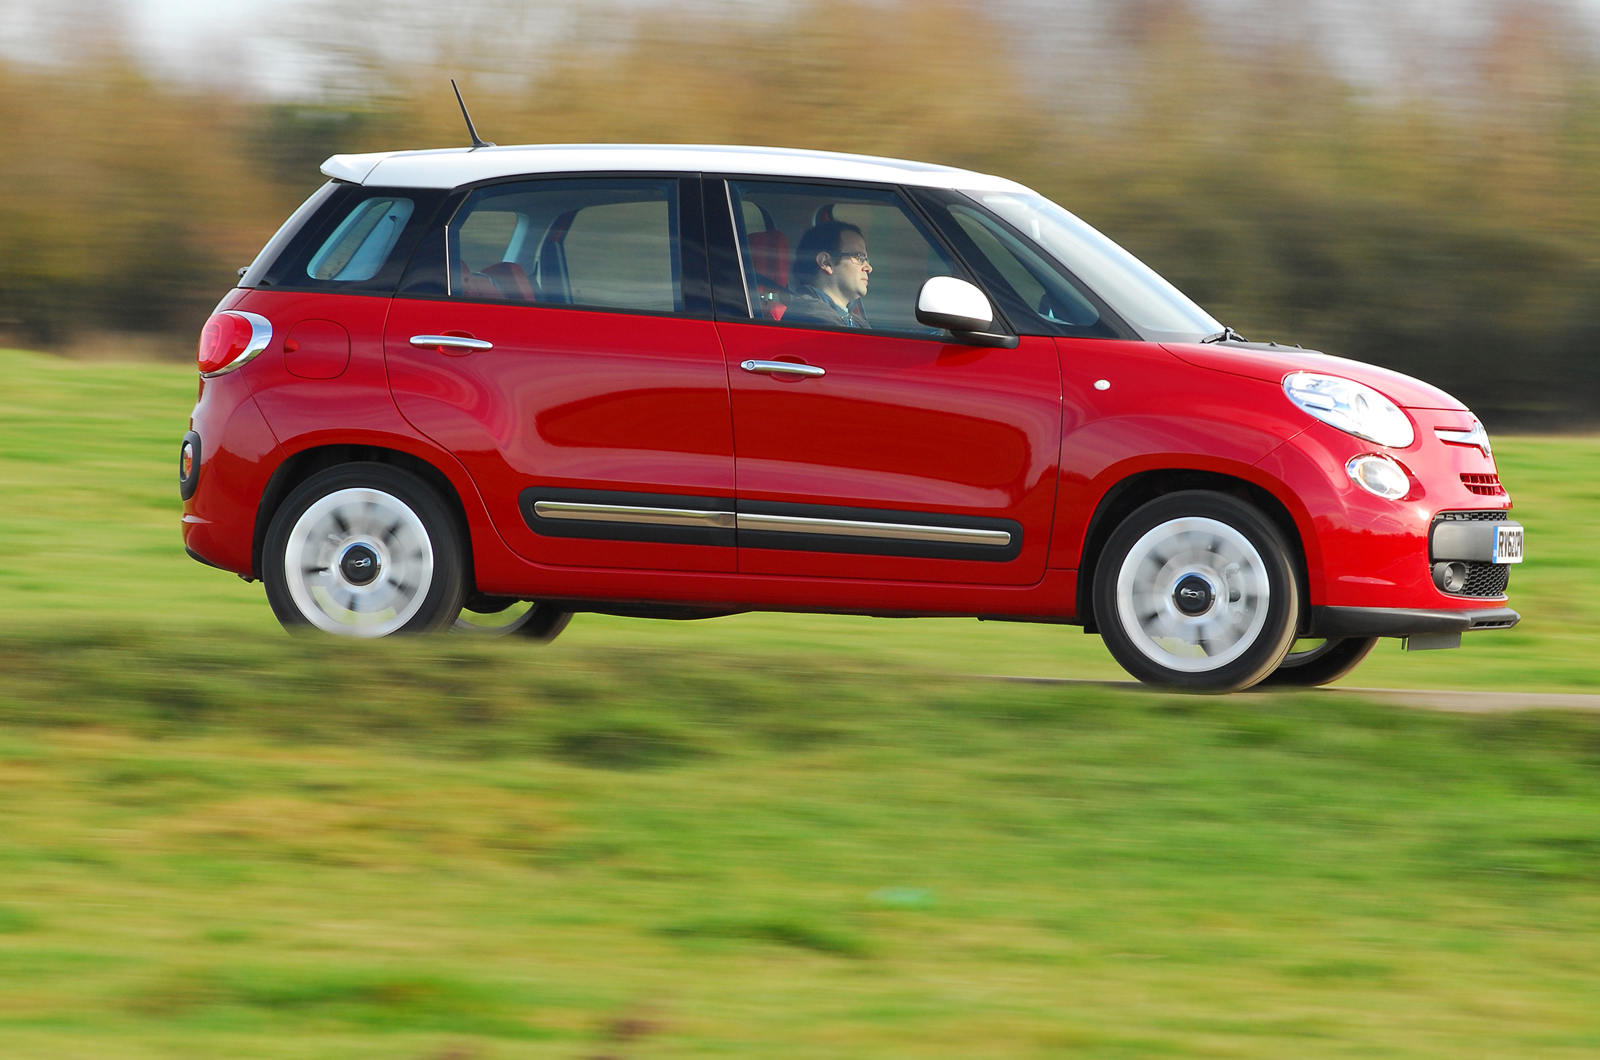 Fiat 500L 1.6 MultiJet 105hp Lounge first drive review